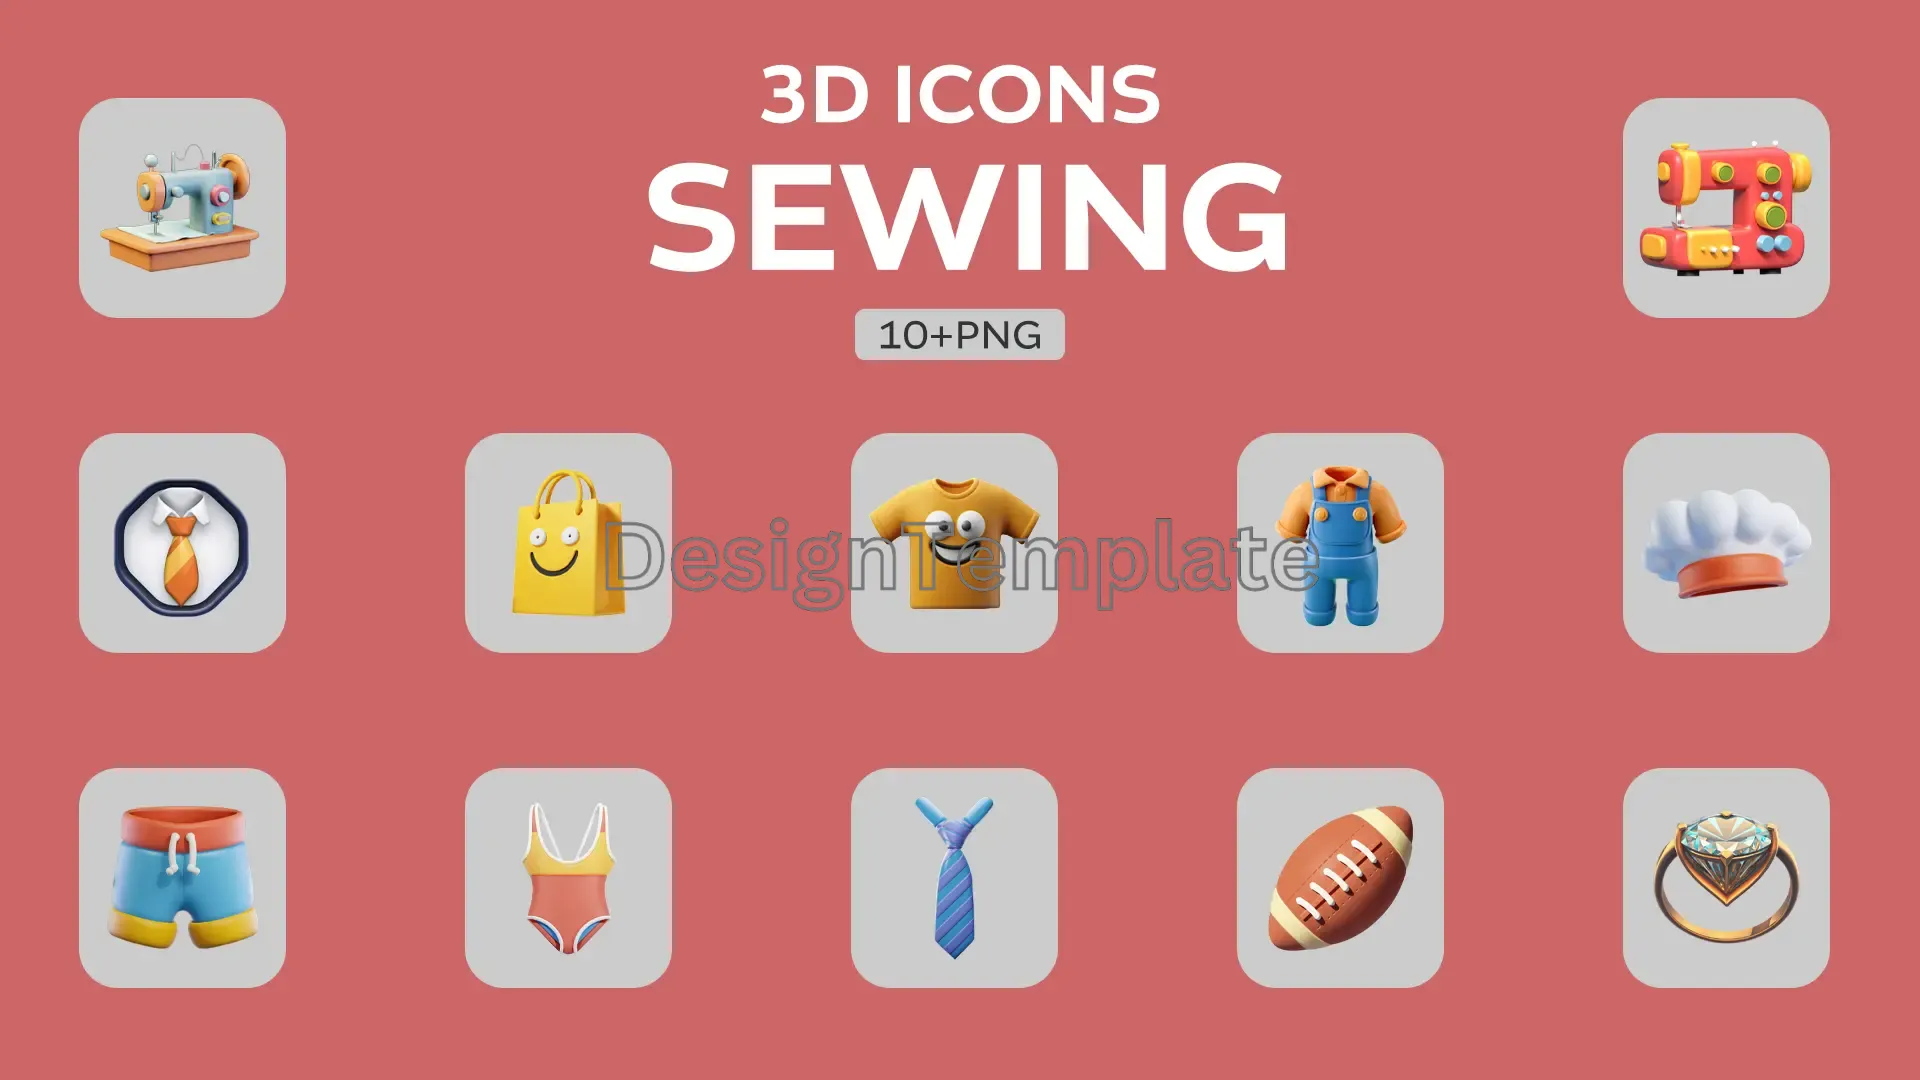 Stitched Styles Sewing 3D Icons Collection image